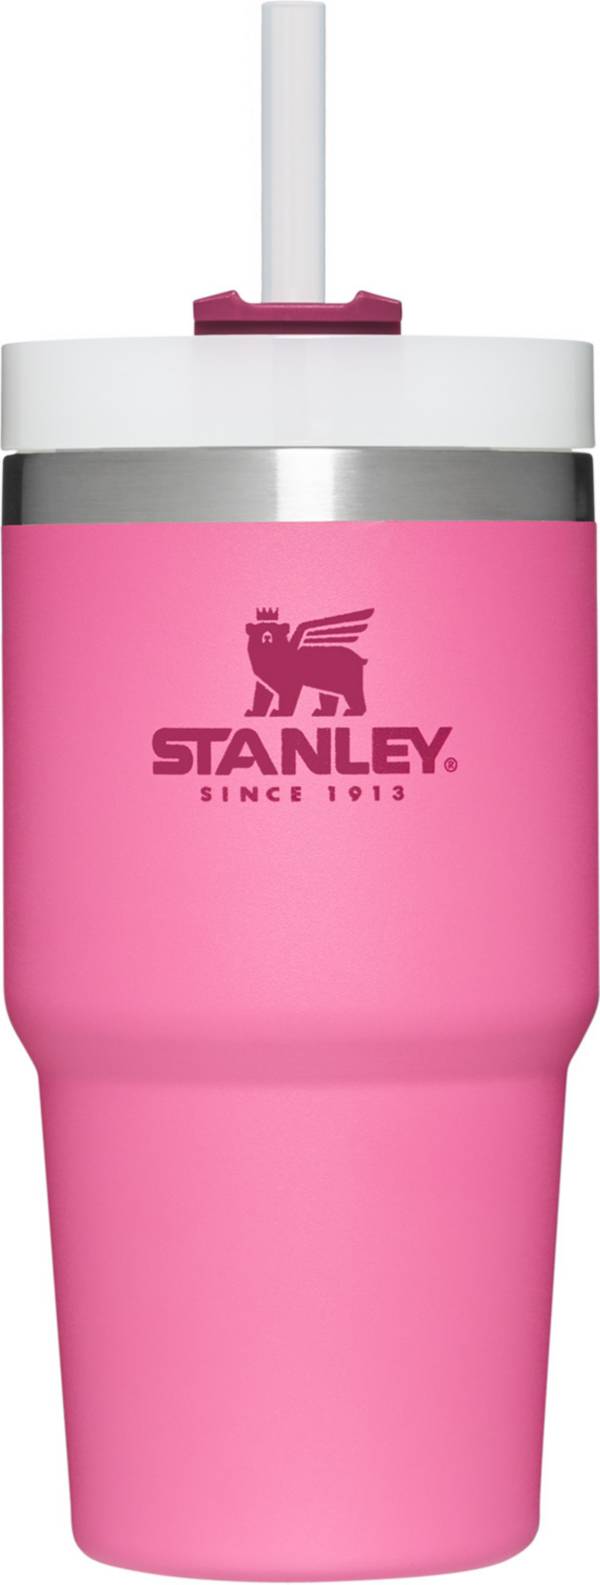 Stanley Adventure Quencher 20 oz. Travel Tumbler product image